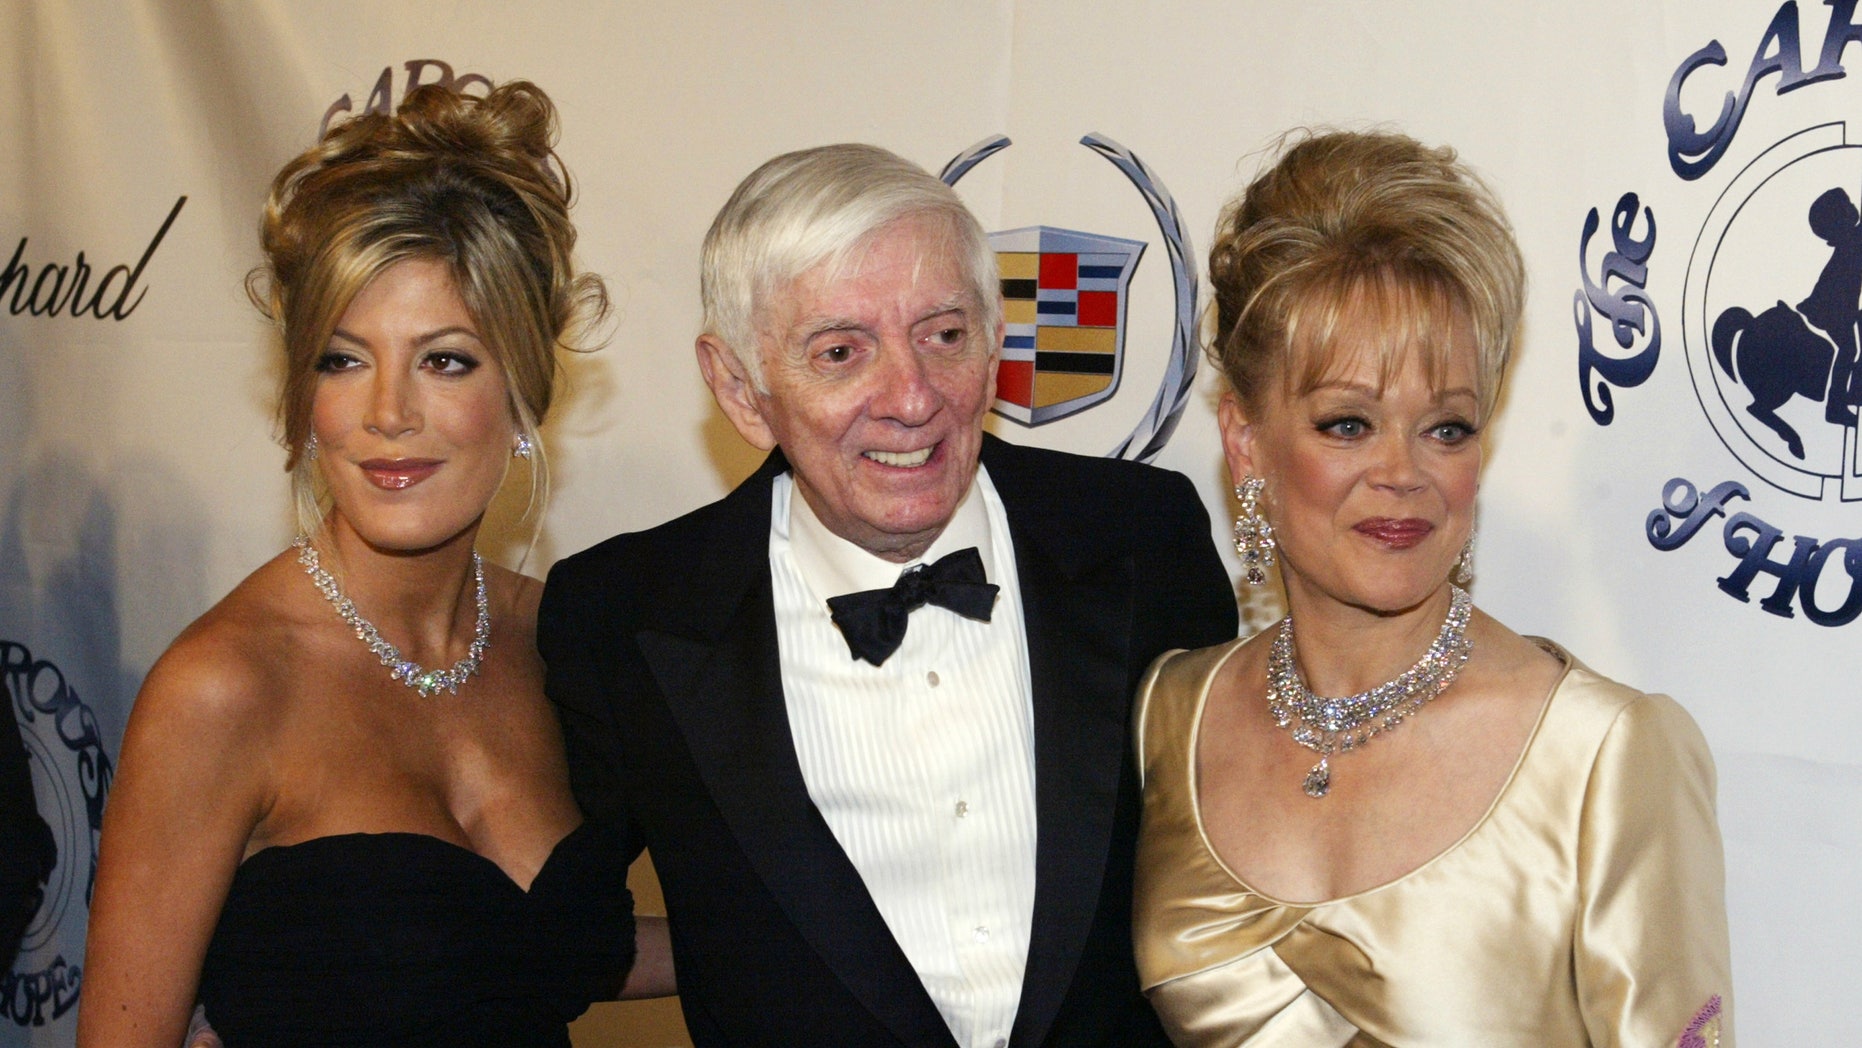 Candy Spelling Dishes About Penile Implants And Relationship With Tori